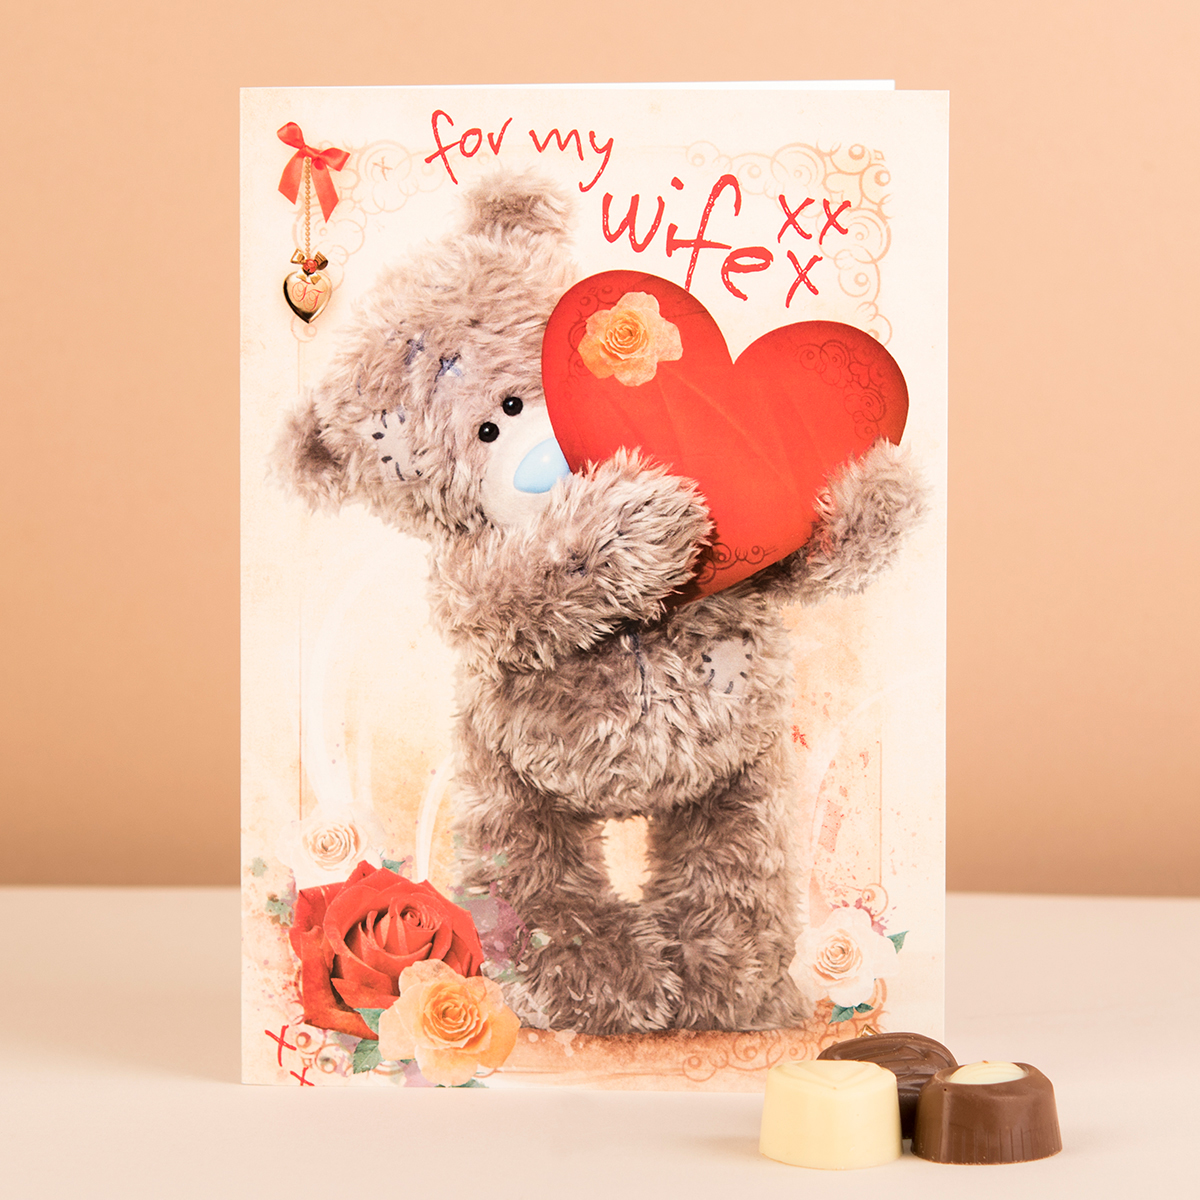 Me To You Card - For My Wife